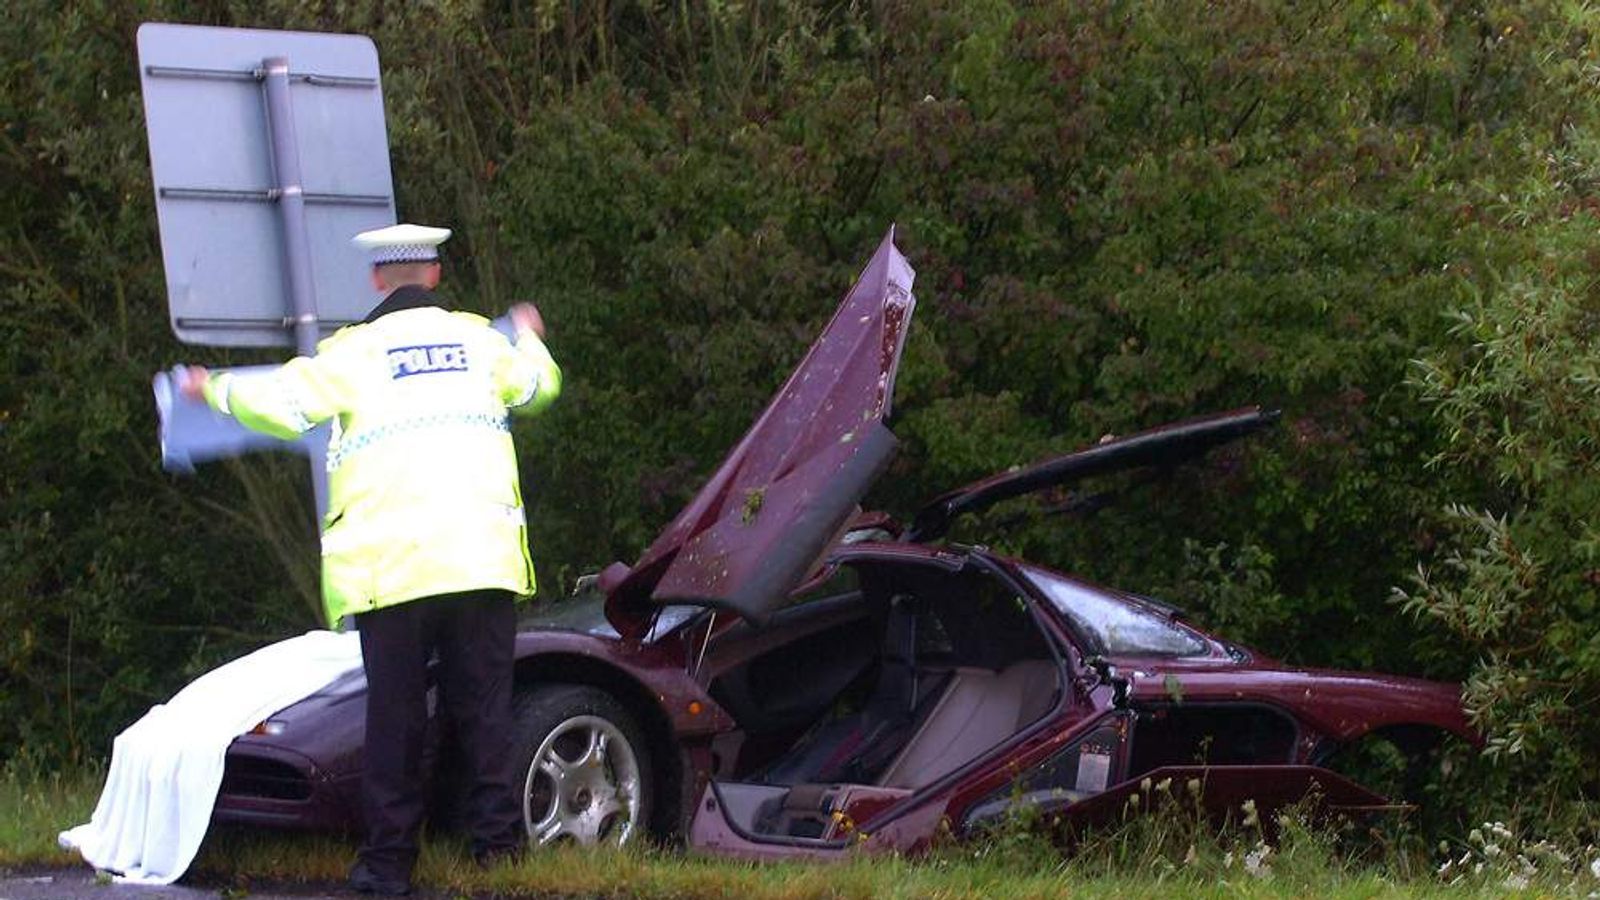 Crashed McLaren F1 in ditch with police officer attending scene